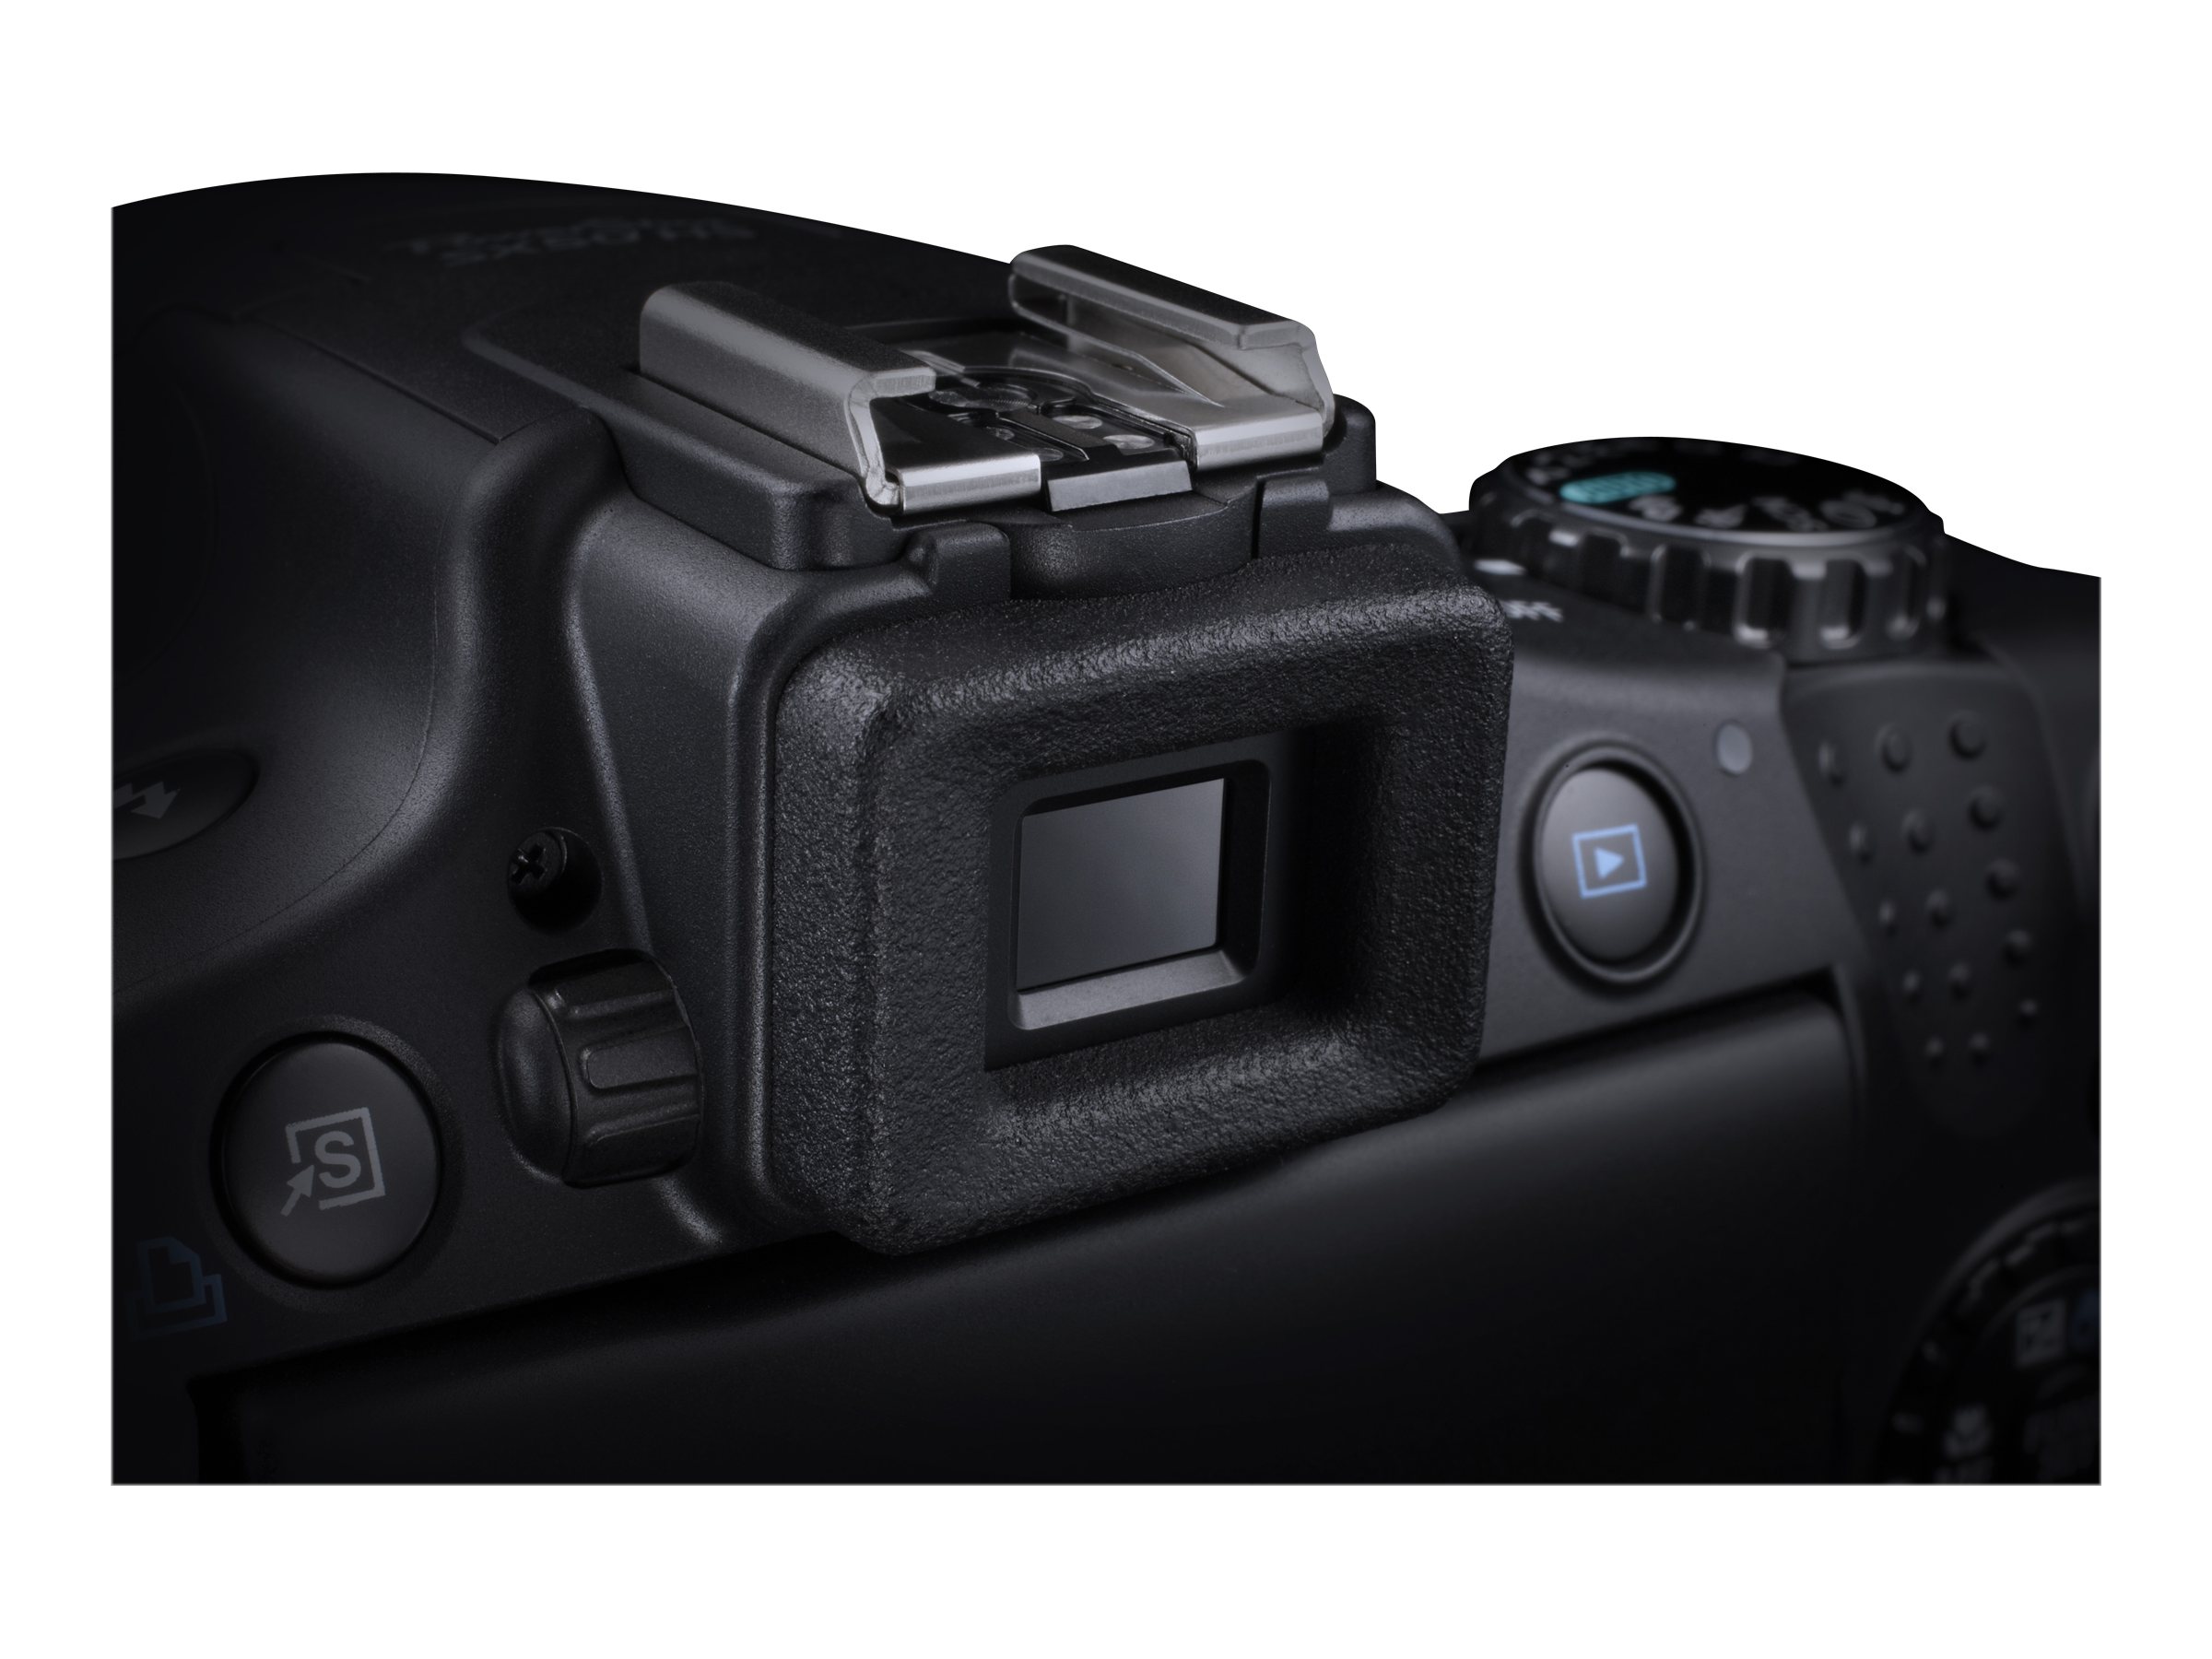 Canon PowerShot SX50 HS - Digital camera - compact - 12.1 MP - 1080p - 50x optical zoom - image 8 of 15